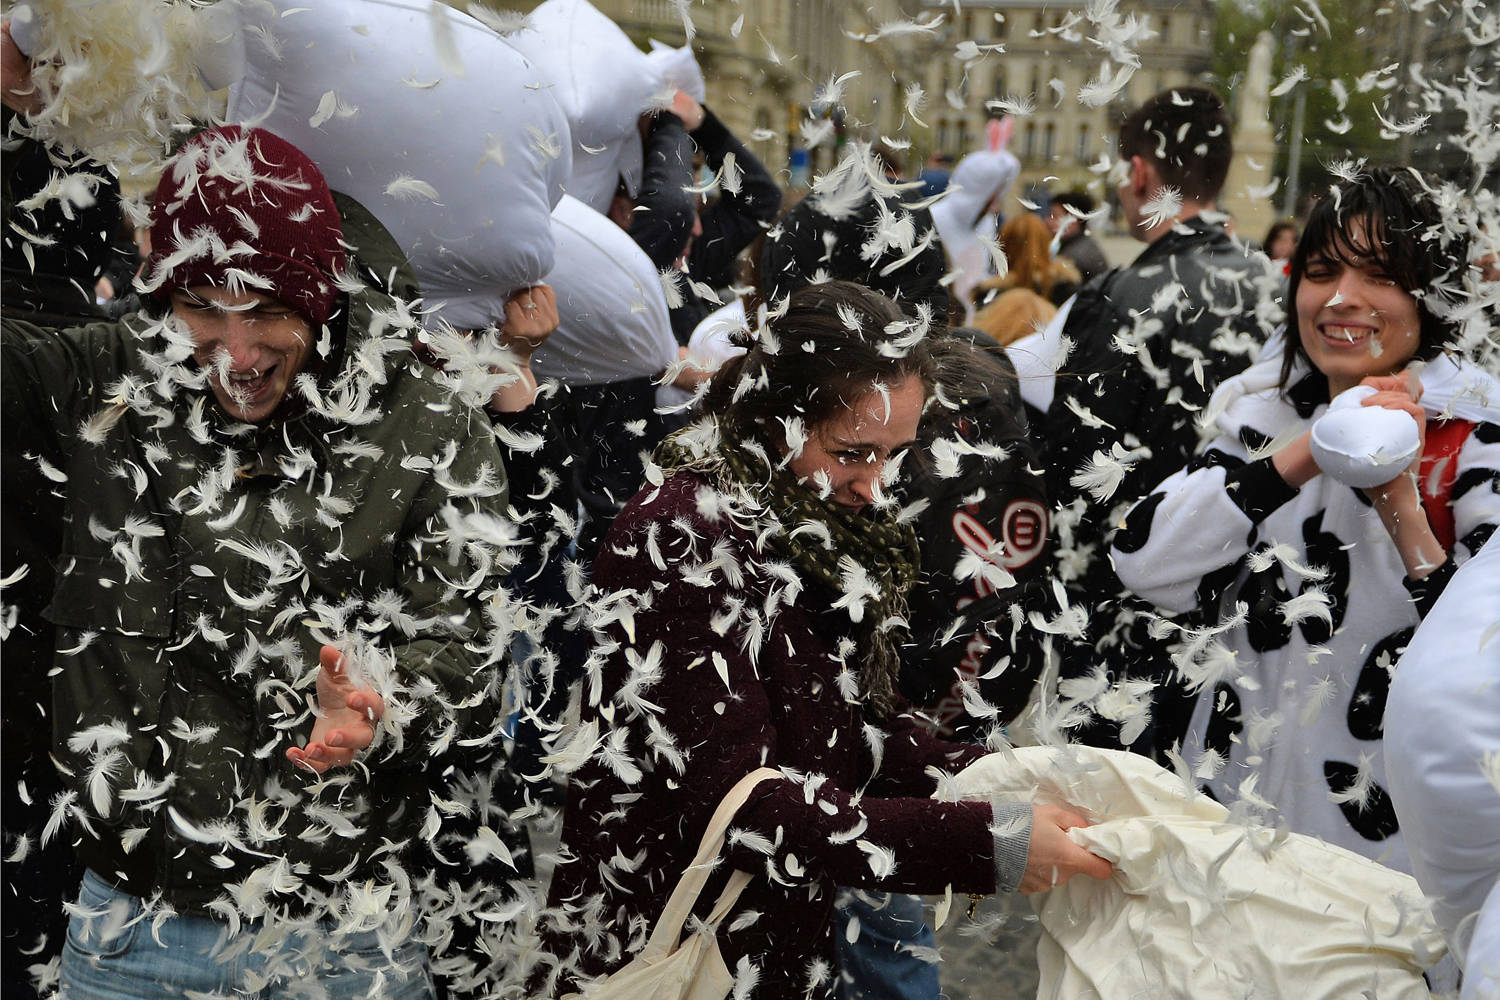 People fight with pillows at the University's Square on World Pillow Fight Day 2014 in Bucharest on April 5, 2014.